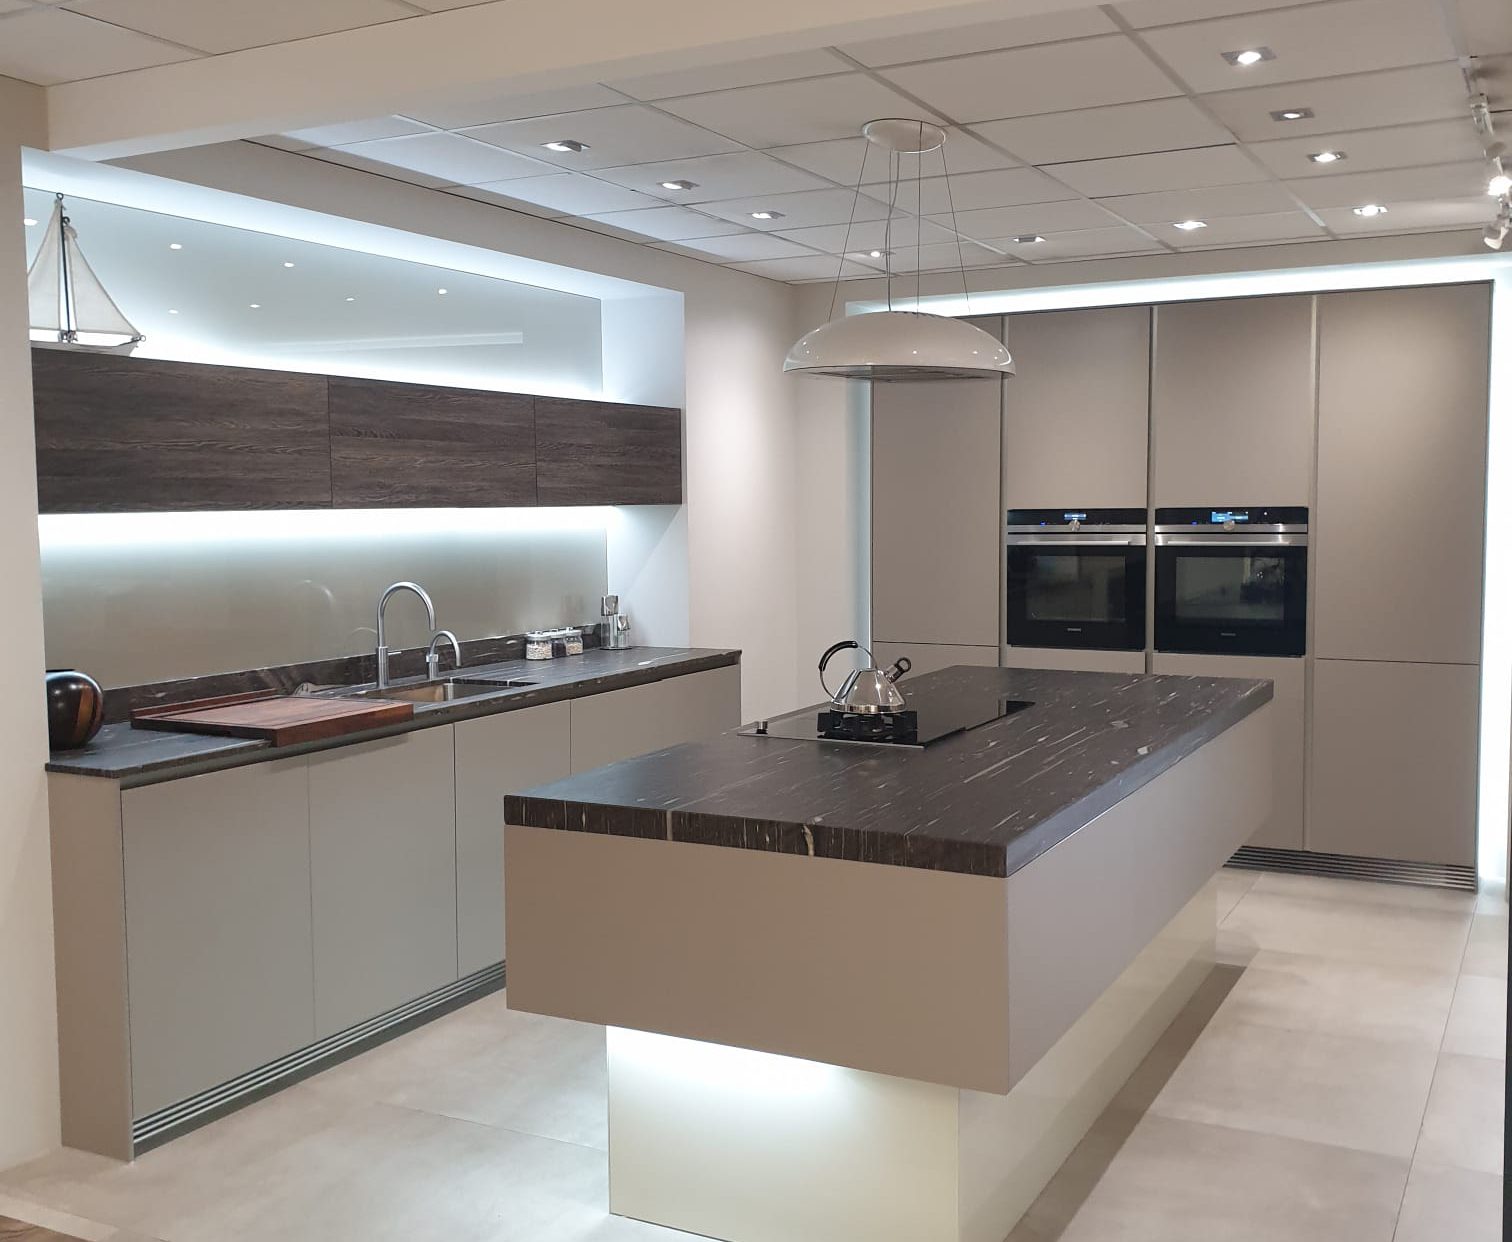 Kitchen with an island and LED backlighting around cabinets